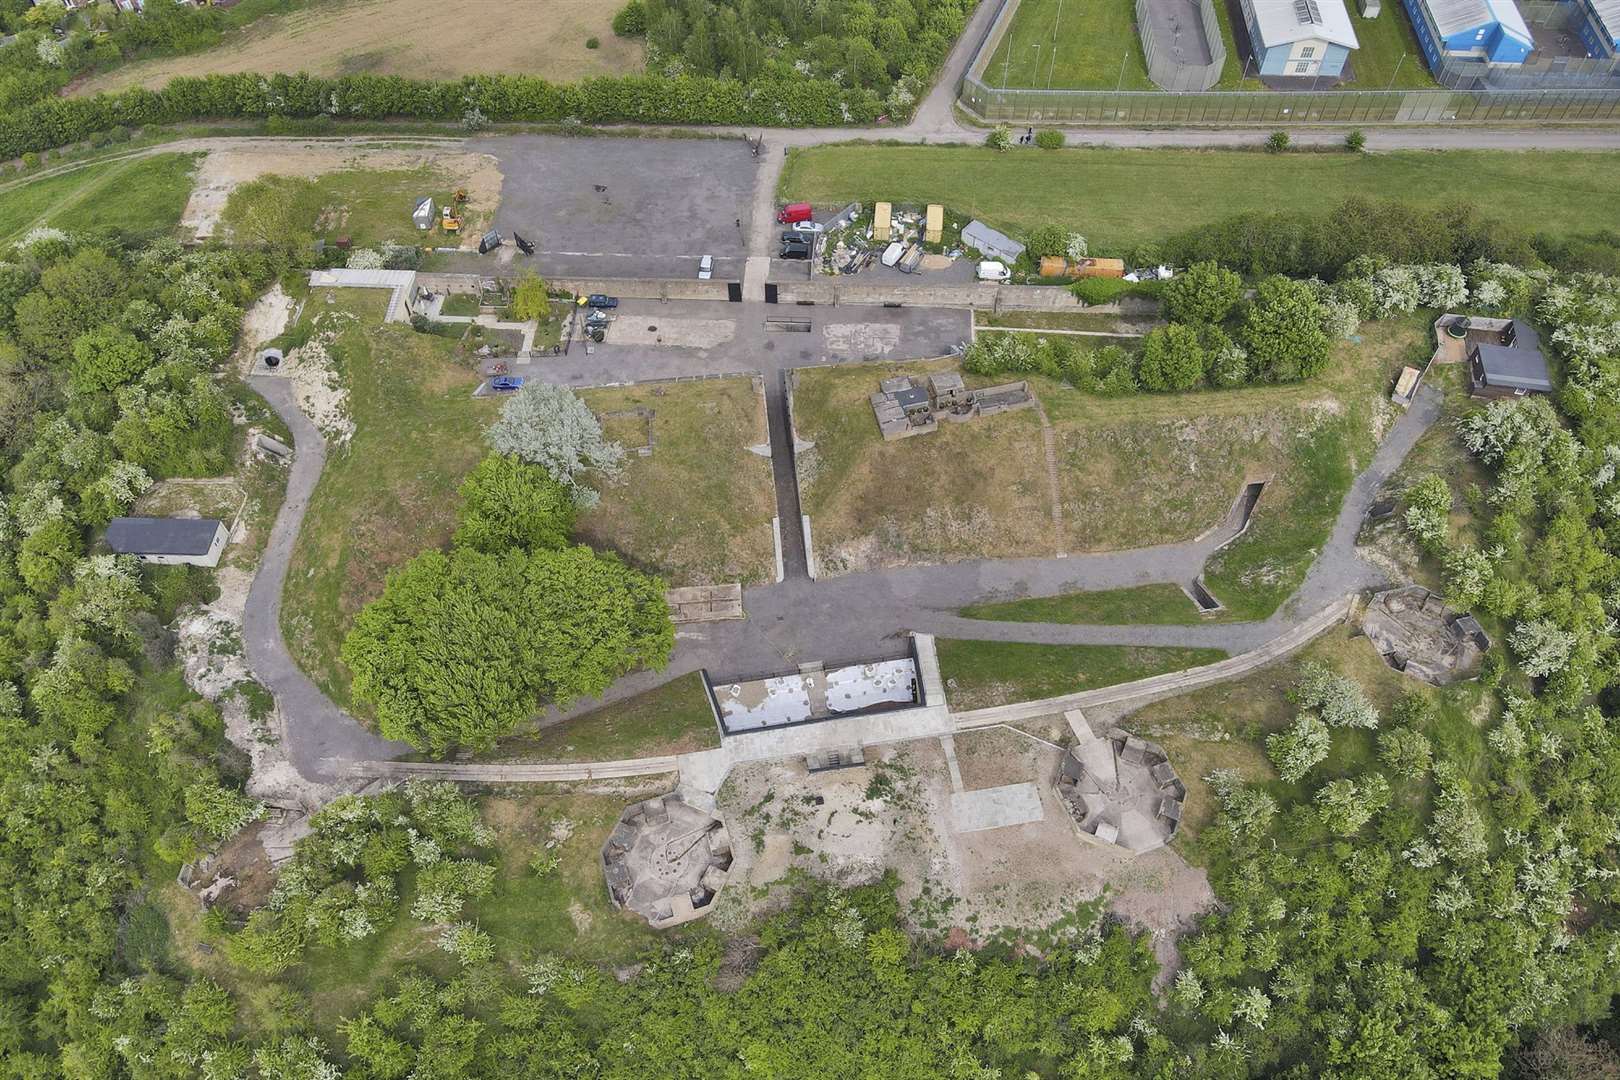 The fort property is set within around 50 acres. Photo: Savills